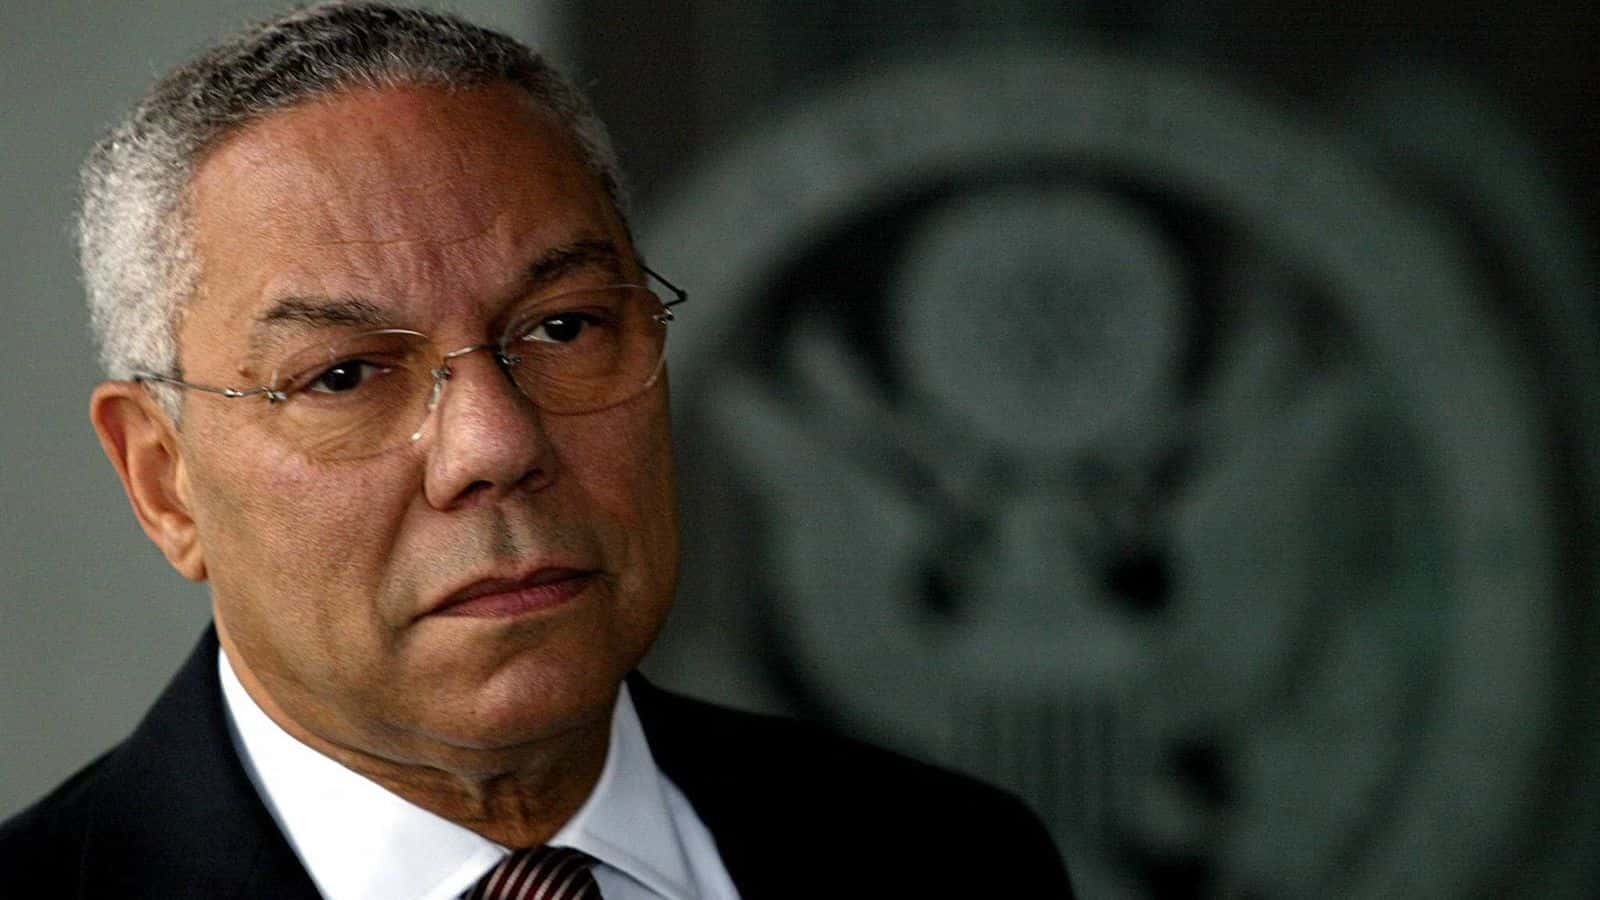 General Colin Powell